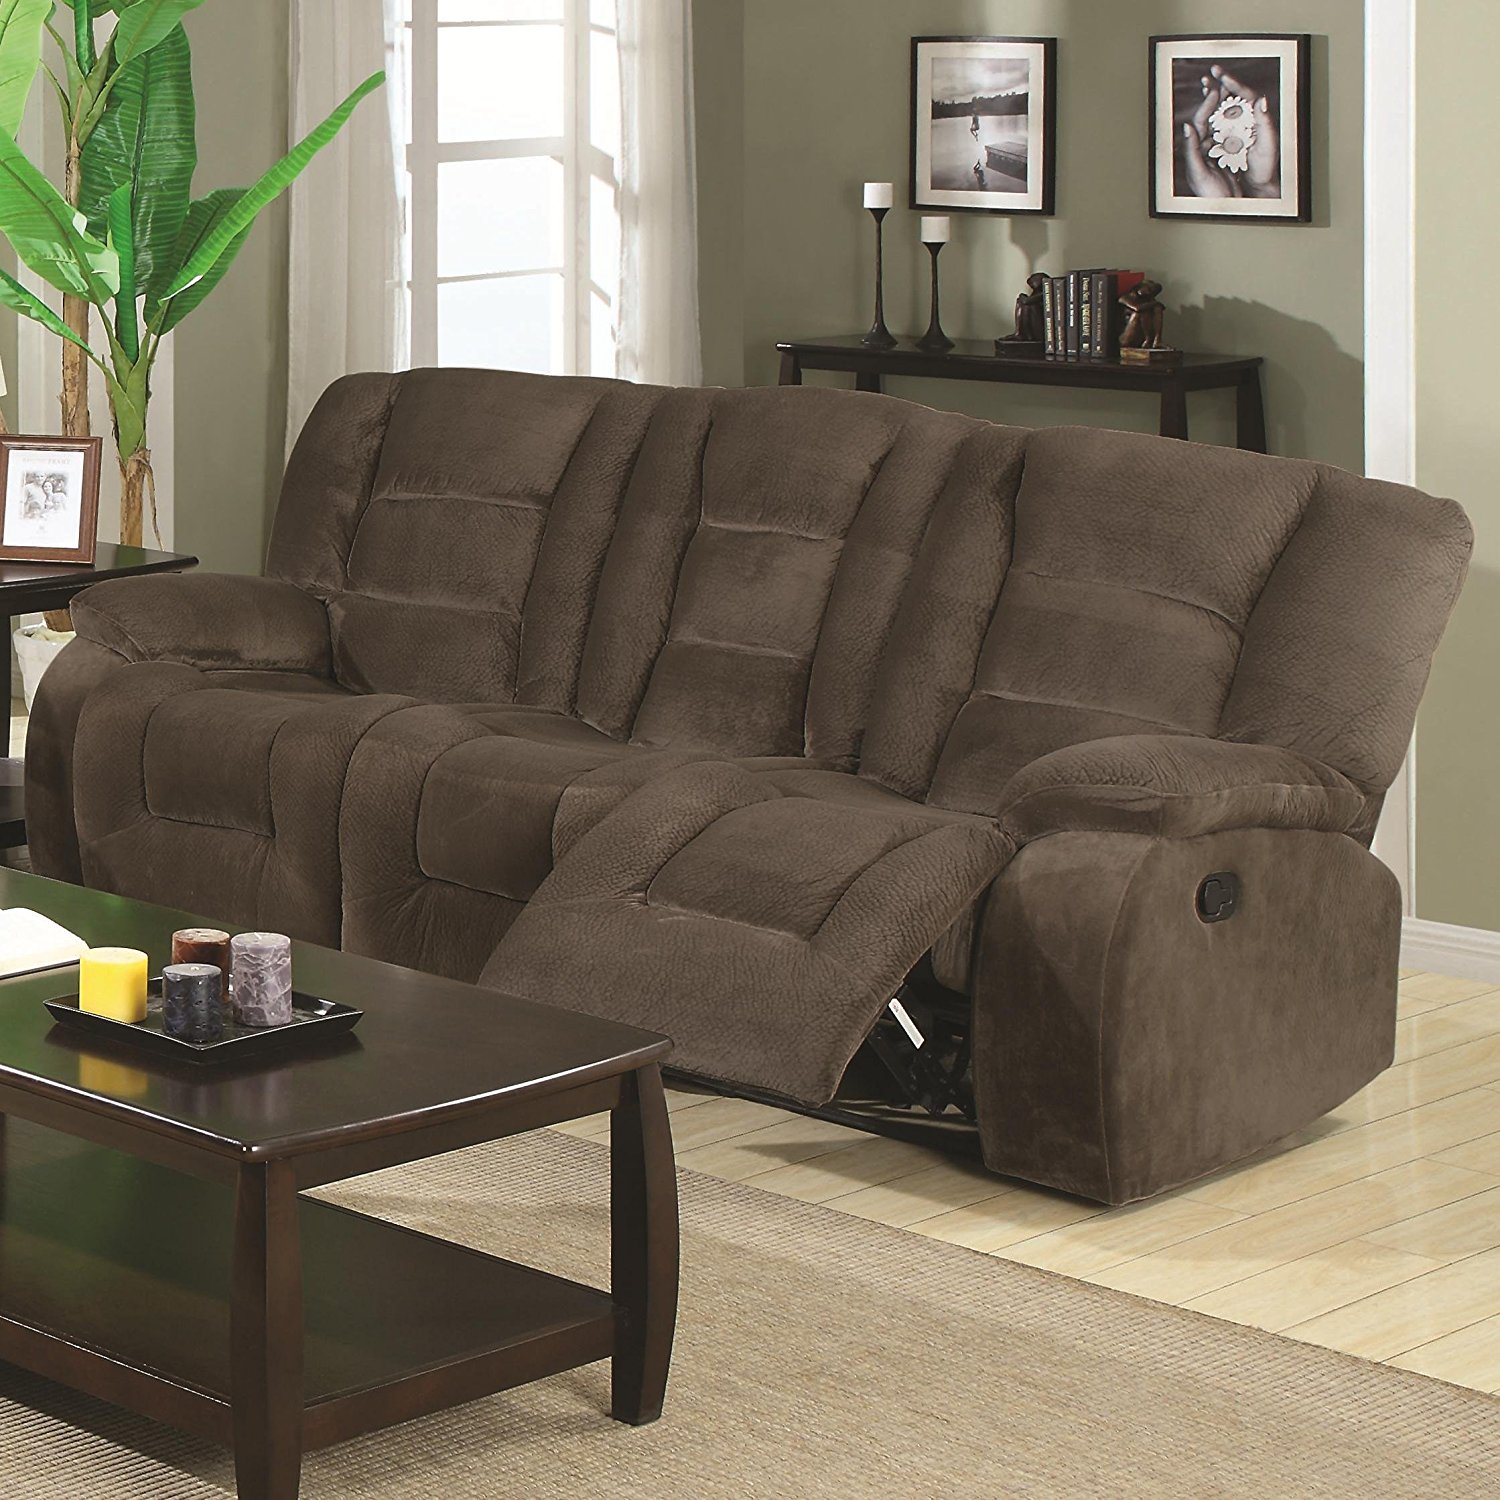 lounge sofas sectional target recliner set chaise boy couch reclining power lazy and furniture sofa covers slipcovers couches loveseat jcpenney leather accent tables full size